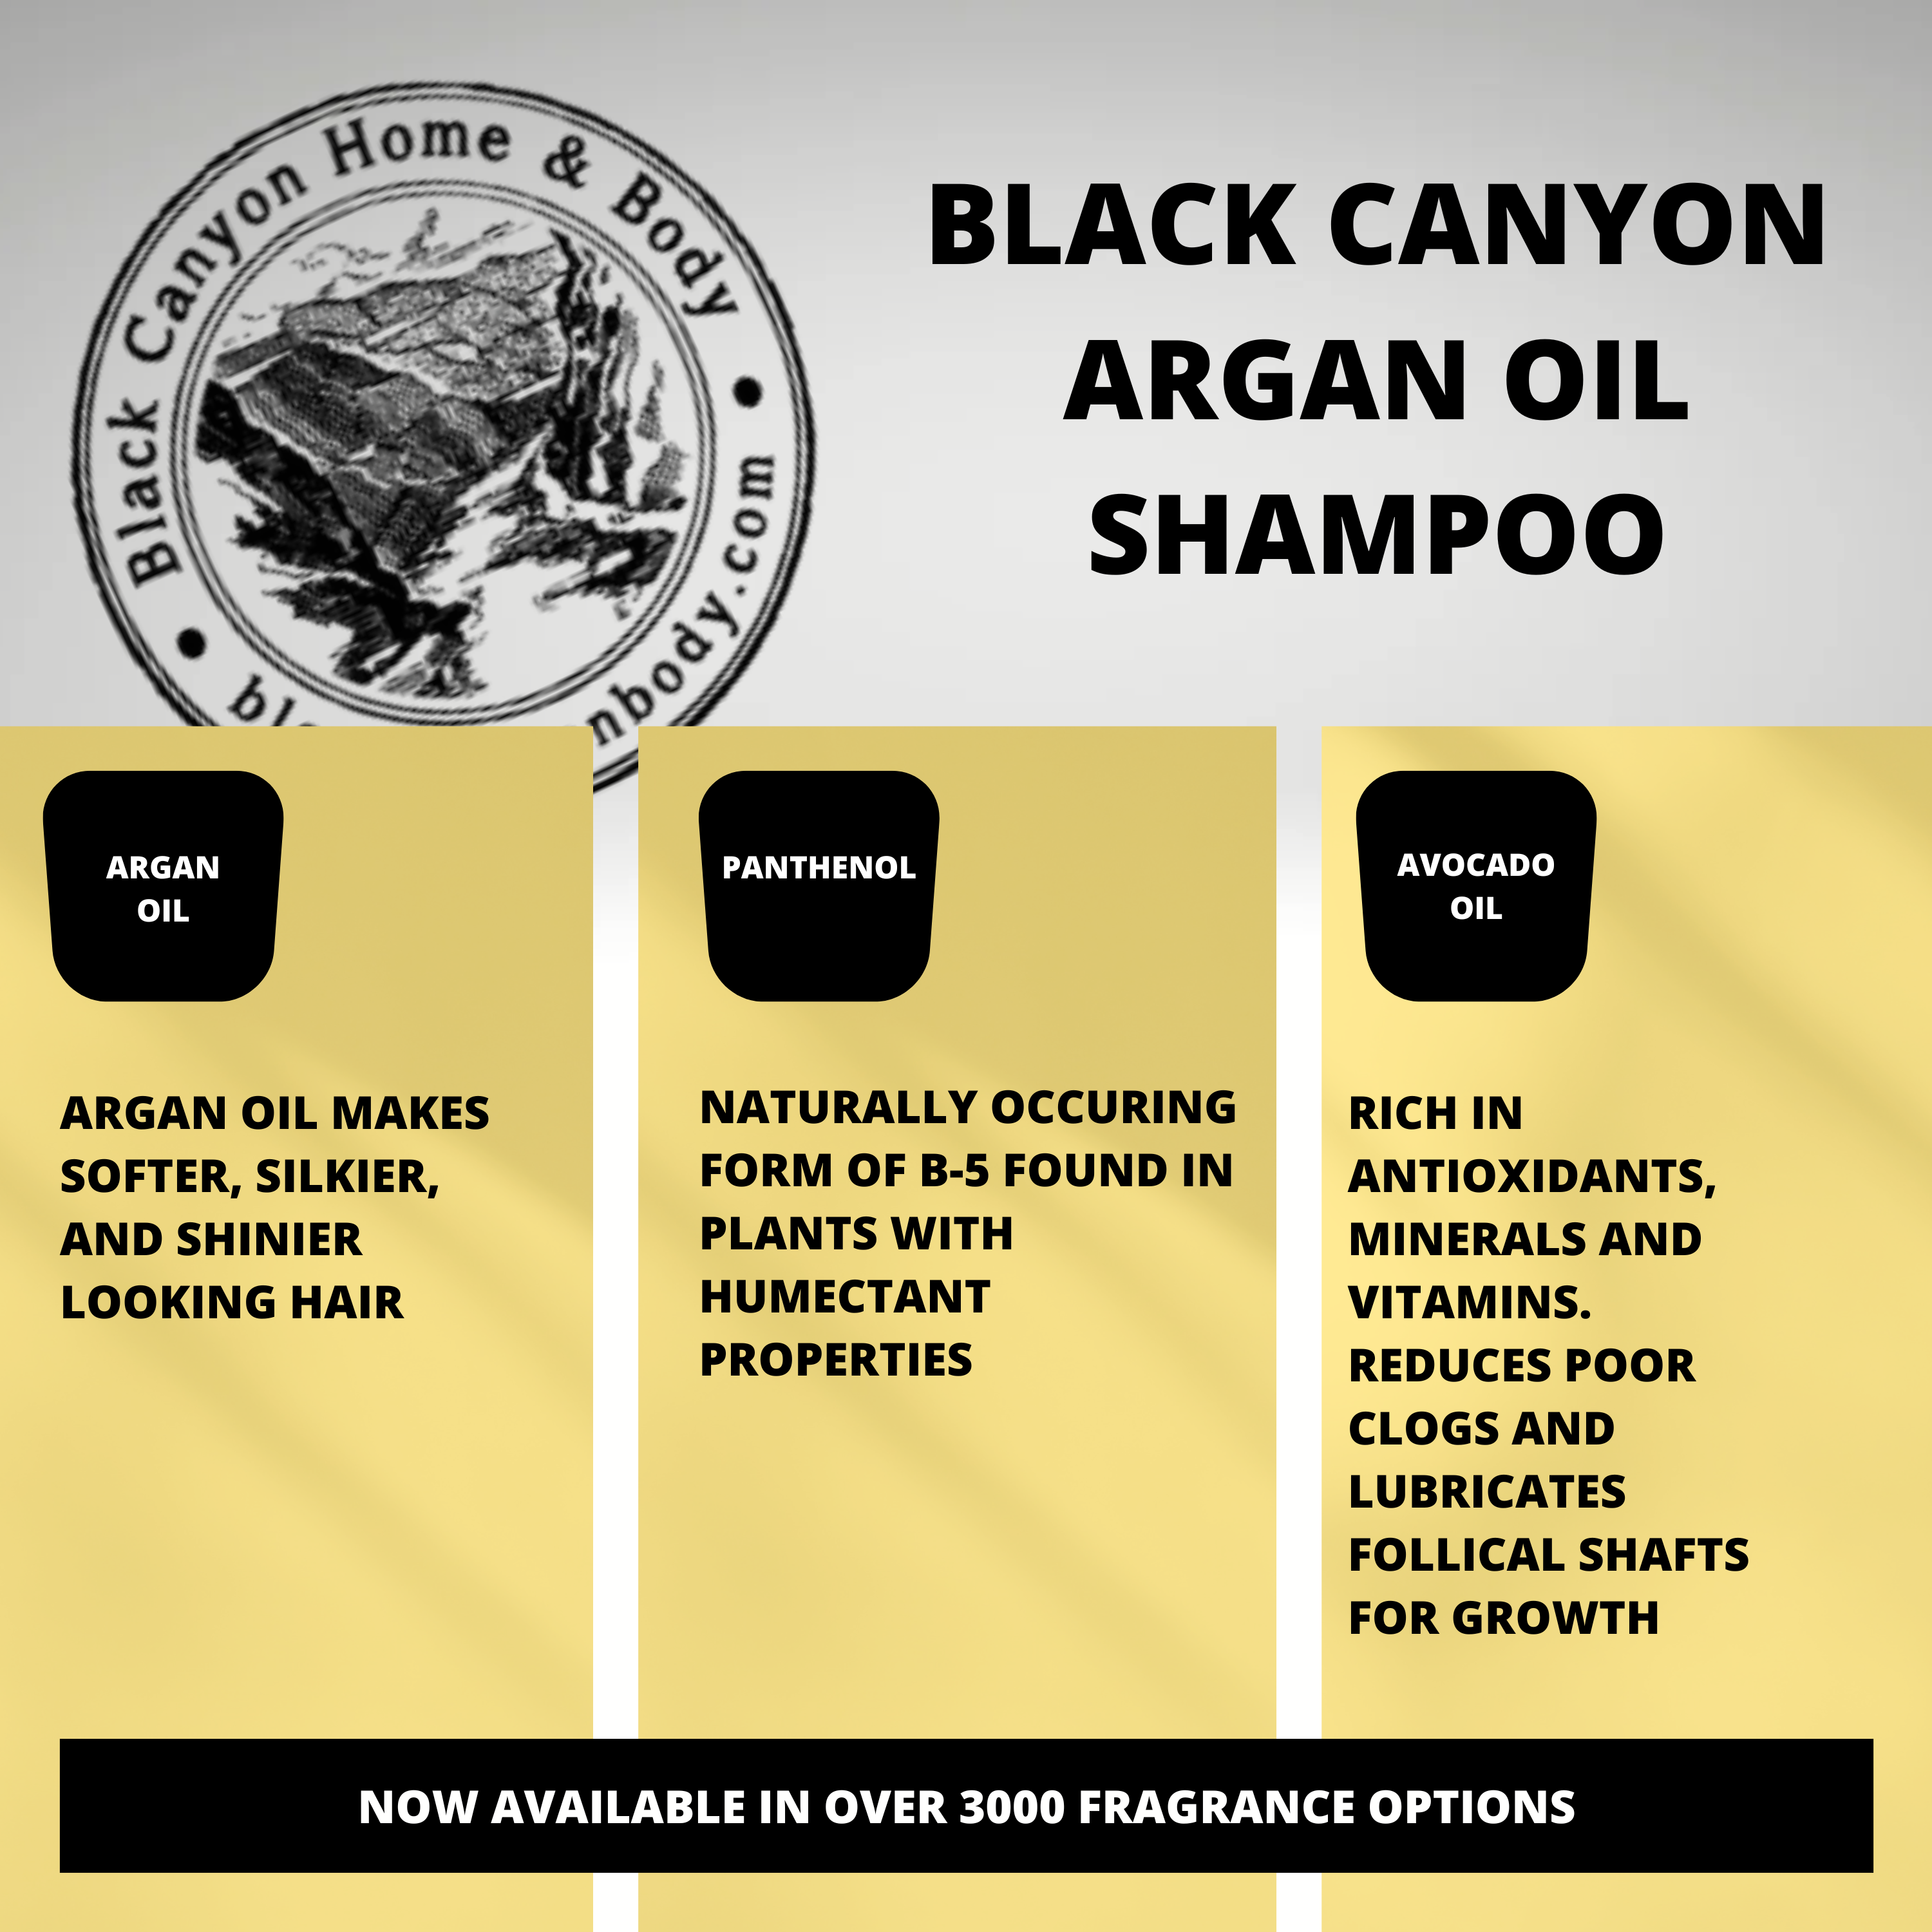 Black Canyon Blackberry Amber Scented Shampoo with Argan Oil